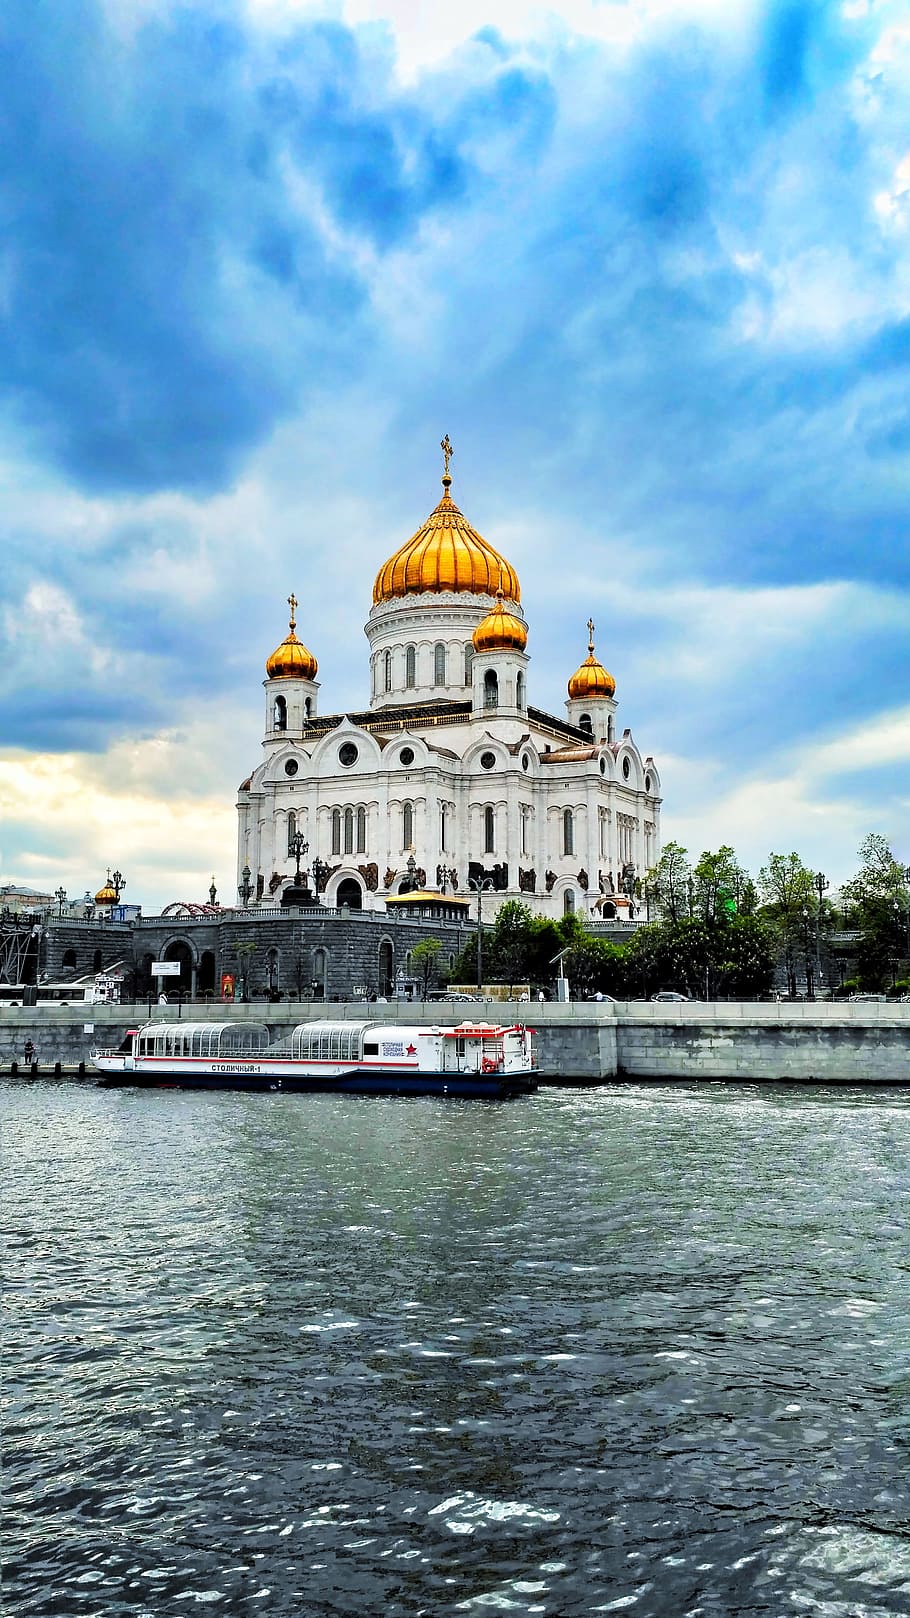 christ, savior cathedral, Moscow, Christ The Savior, Cathedral, christ the savior cathedral, moscow river, stormy sky, the churches of moscow, orthodoxy